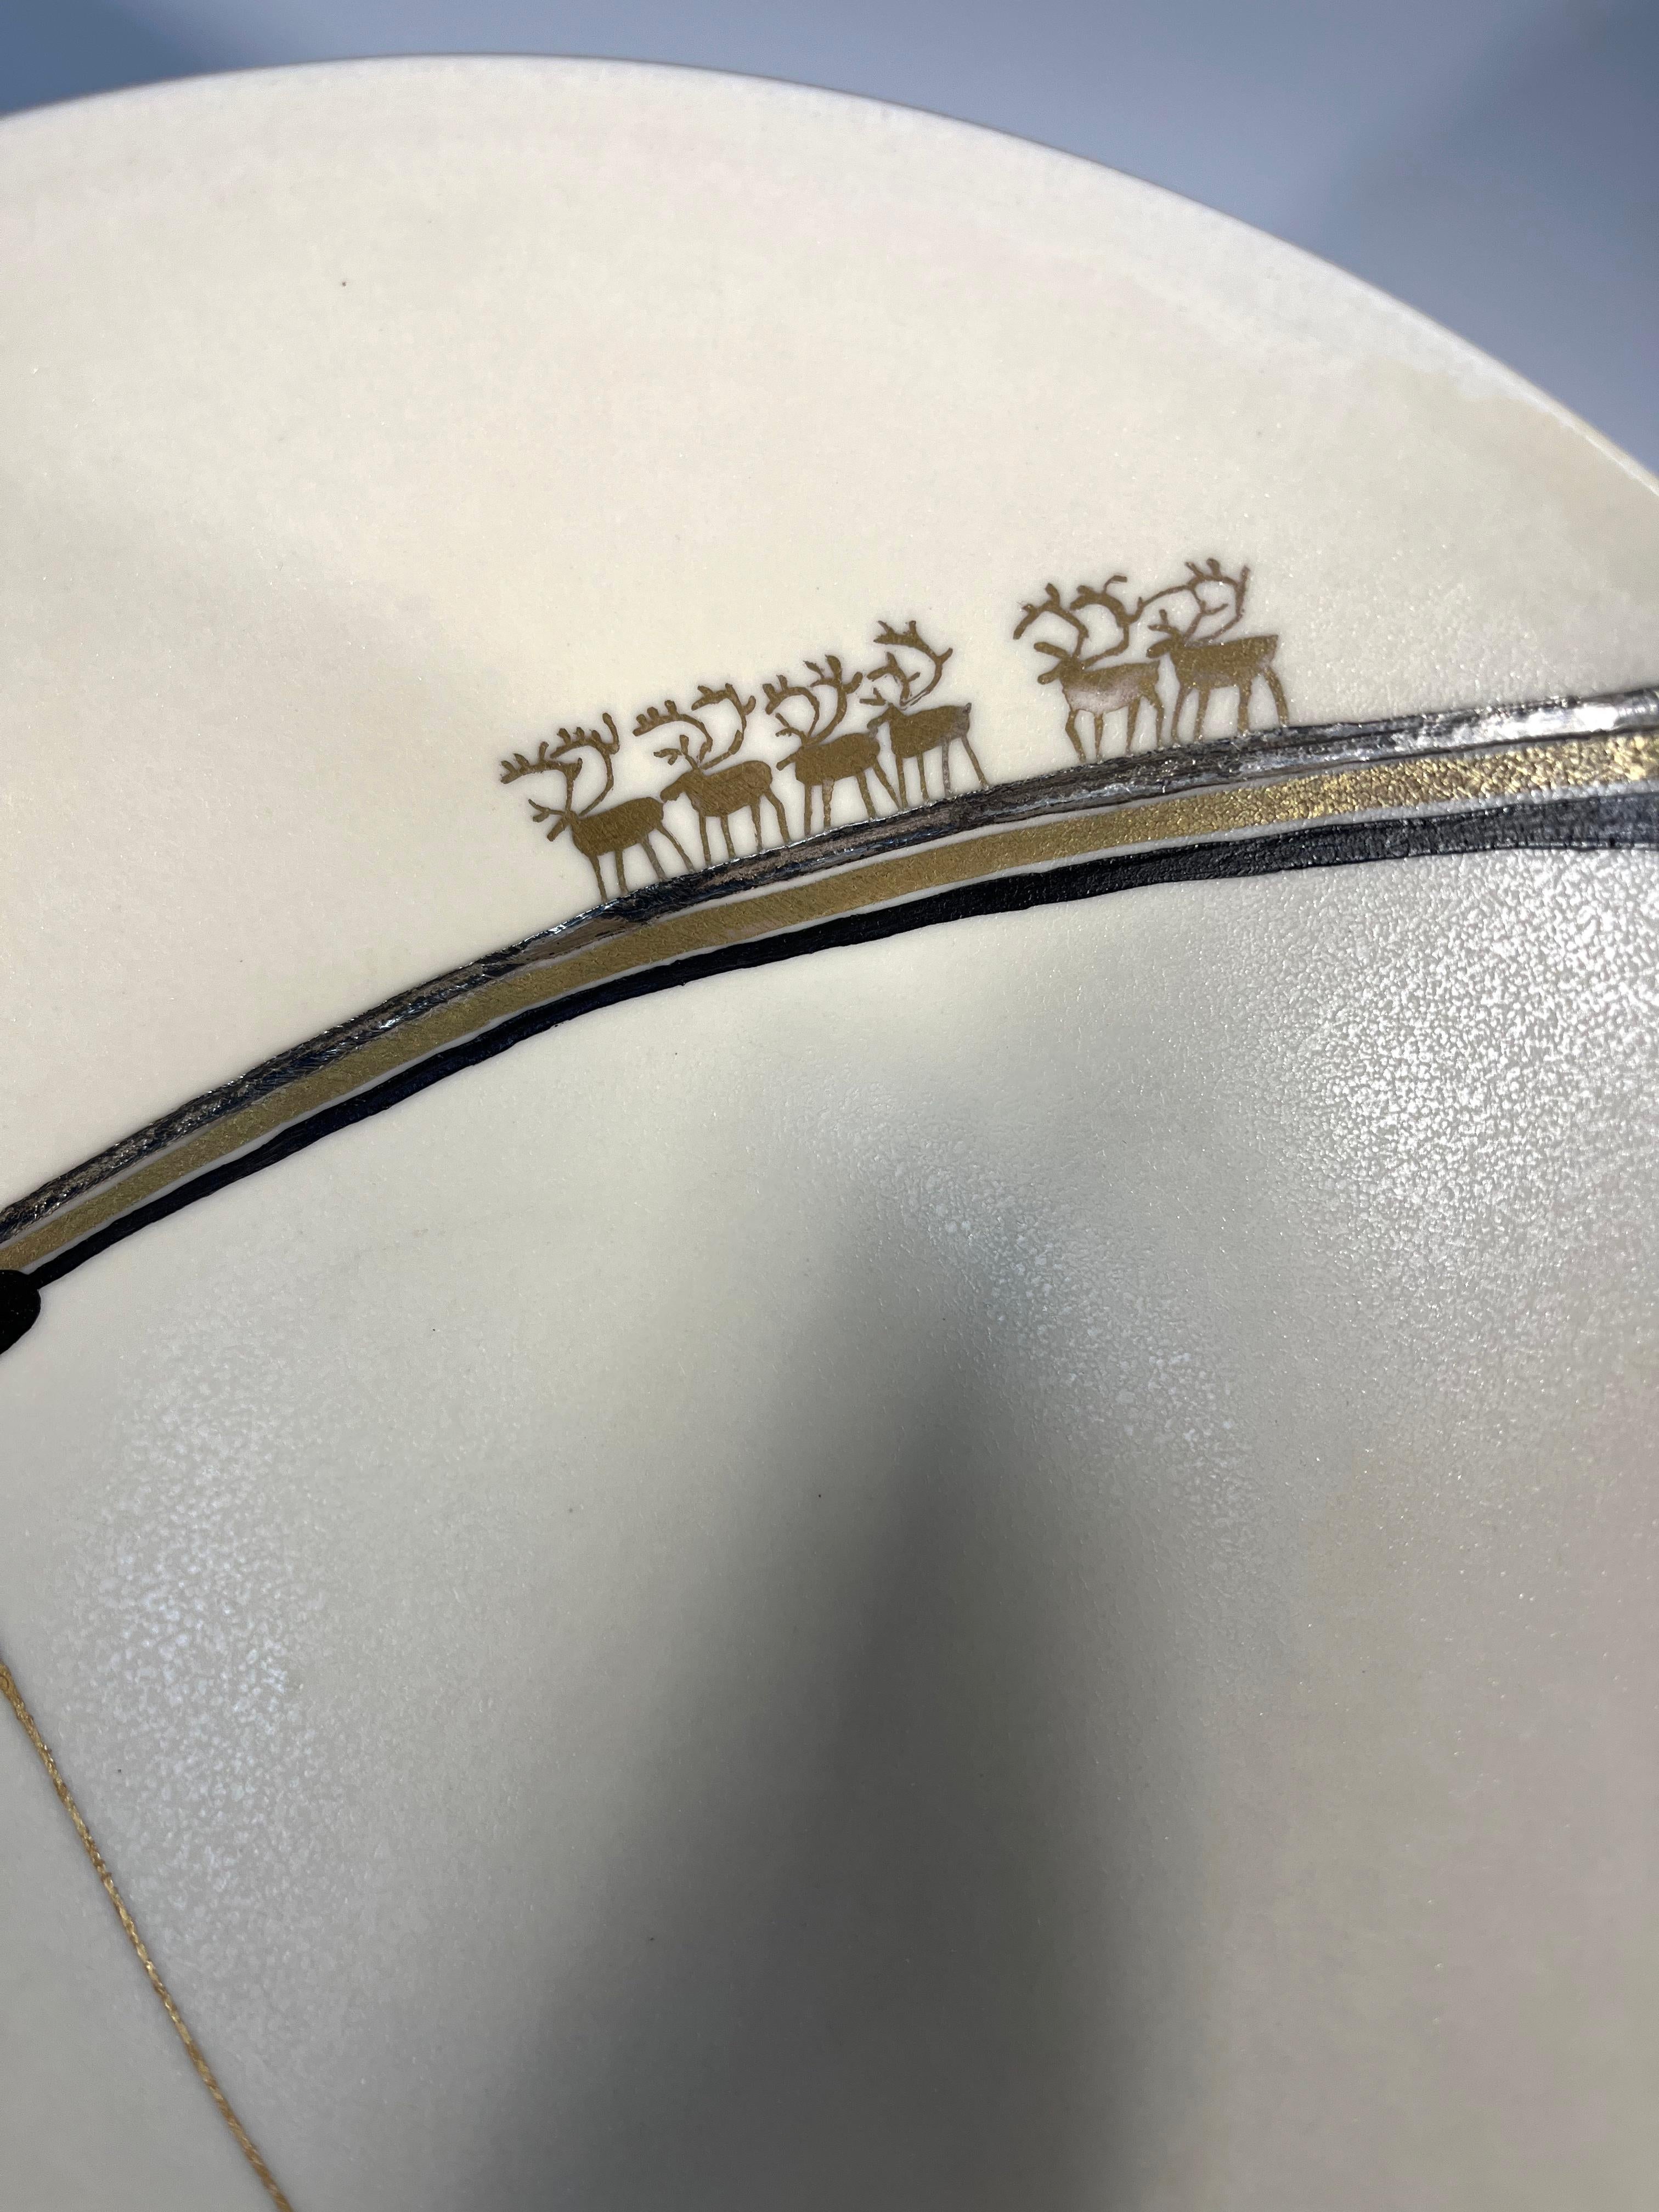 Gold Reindeer Bowl By Bjorge Skohg For Gustavsberg, Sweden, c1982 In Excellent Condition For Sale In Rothley, Leicestershire